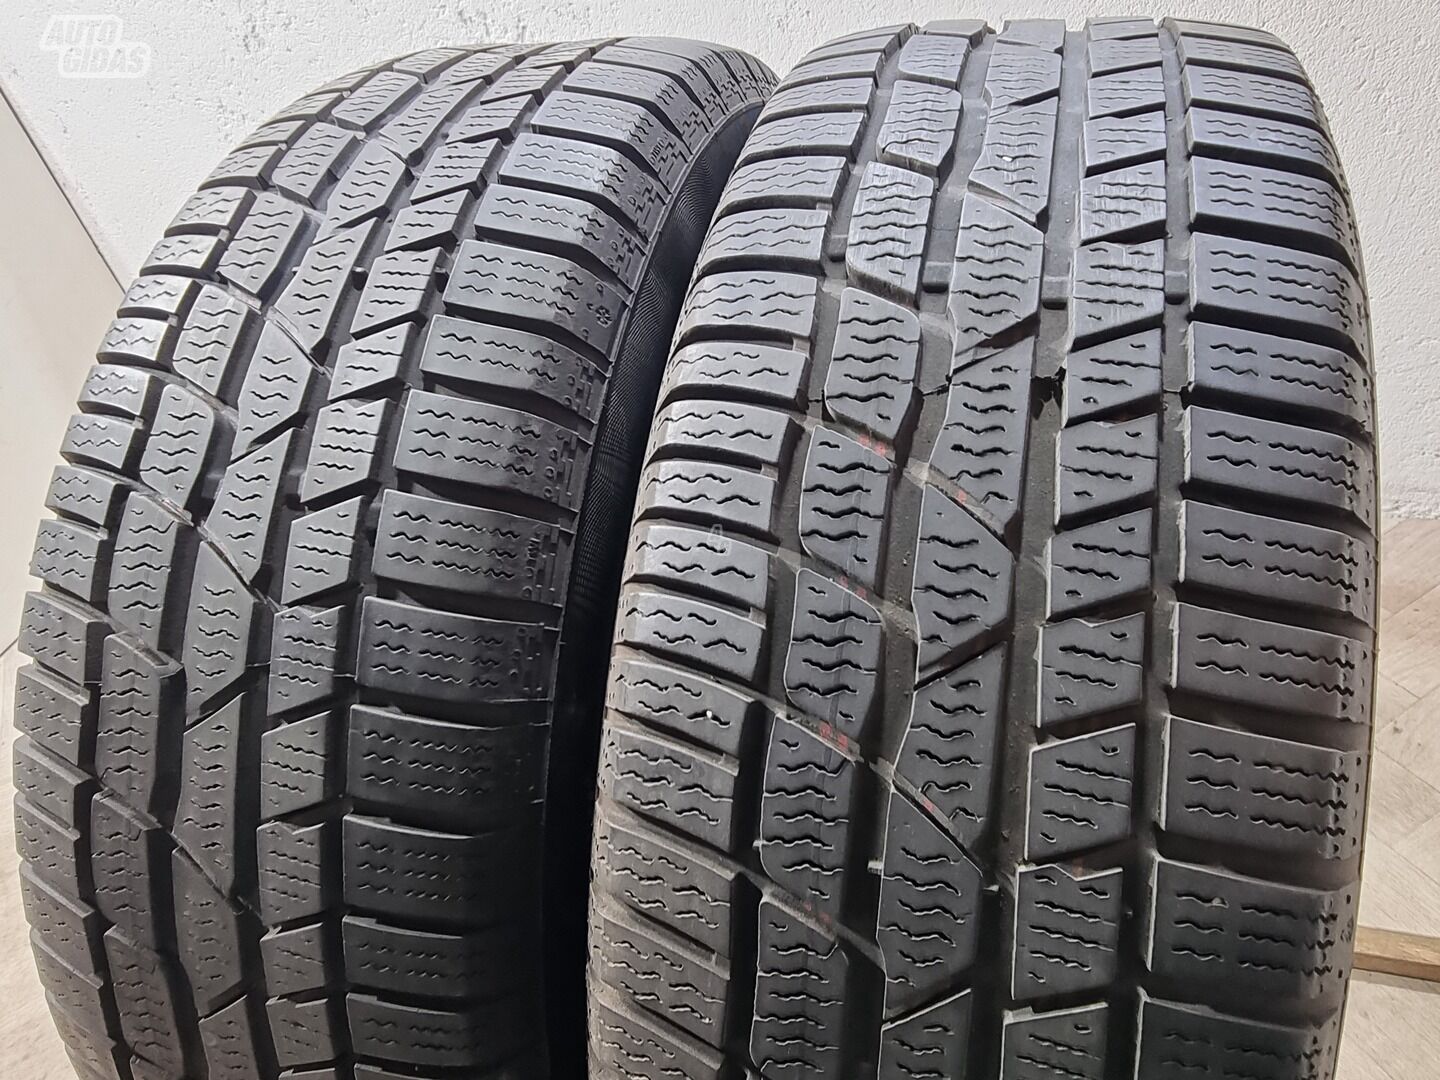 Continental 5-6mm, 2018m R16 universal tyres passanger car